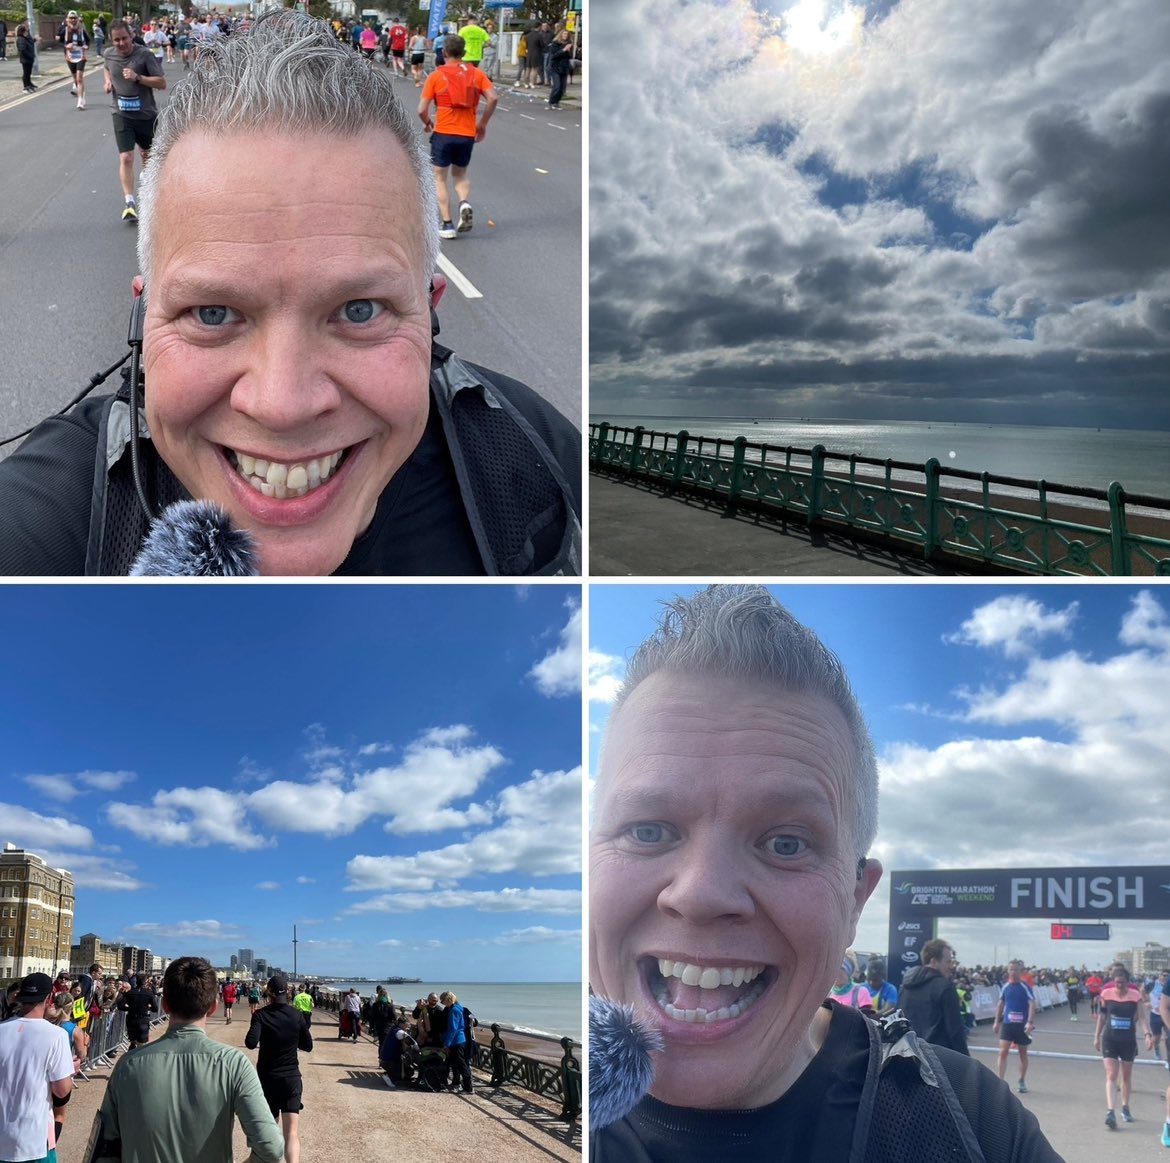 ONE WEEK TODAY I’ll be back in Brighton for the Marathon; frankly, I’m nervous! Sponsor me today for @ParkinsonsUK and make me feel better - justgiving.com/page/rob-deeri…